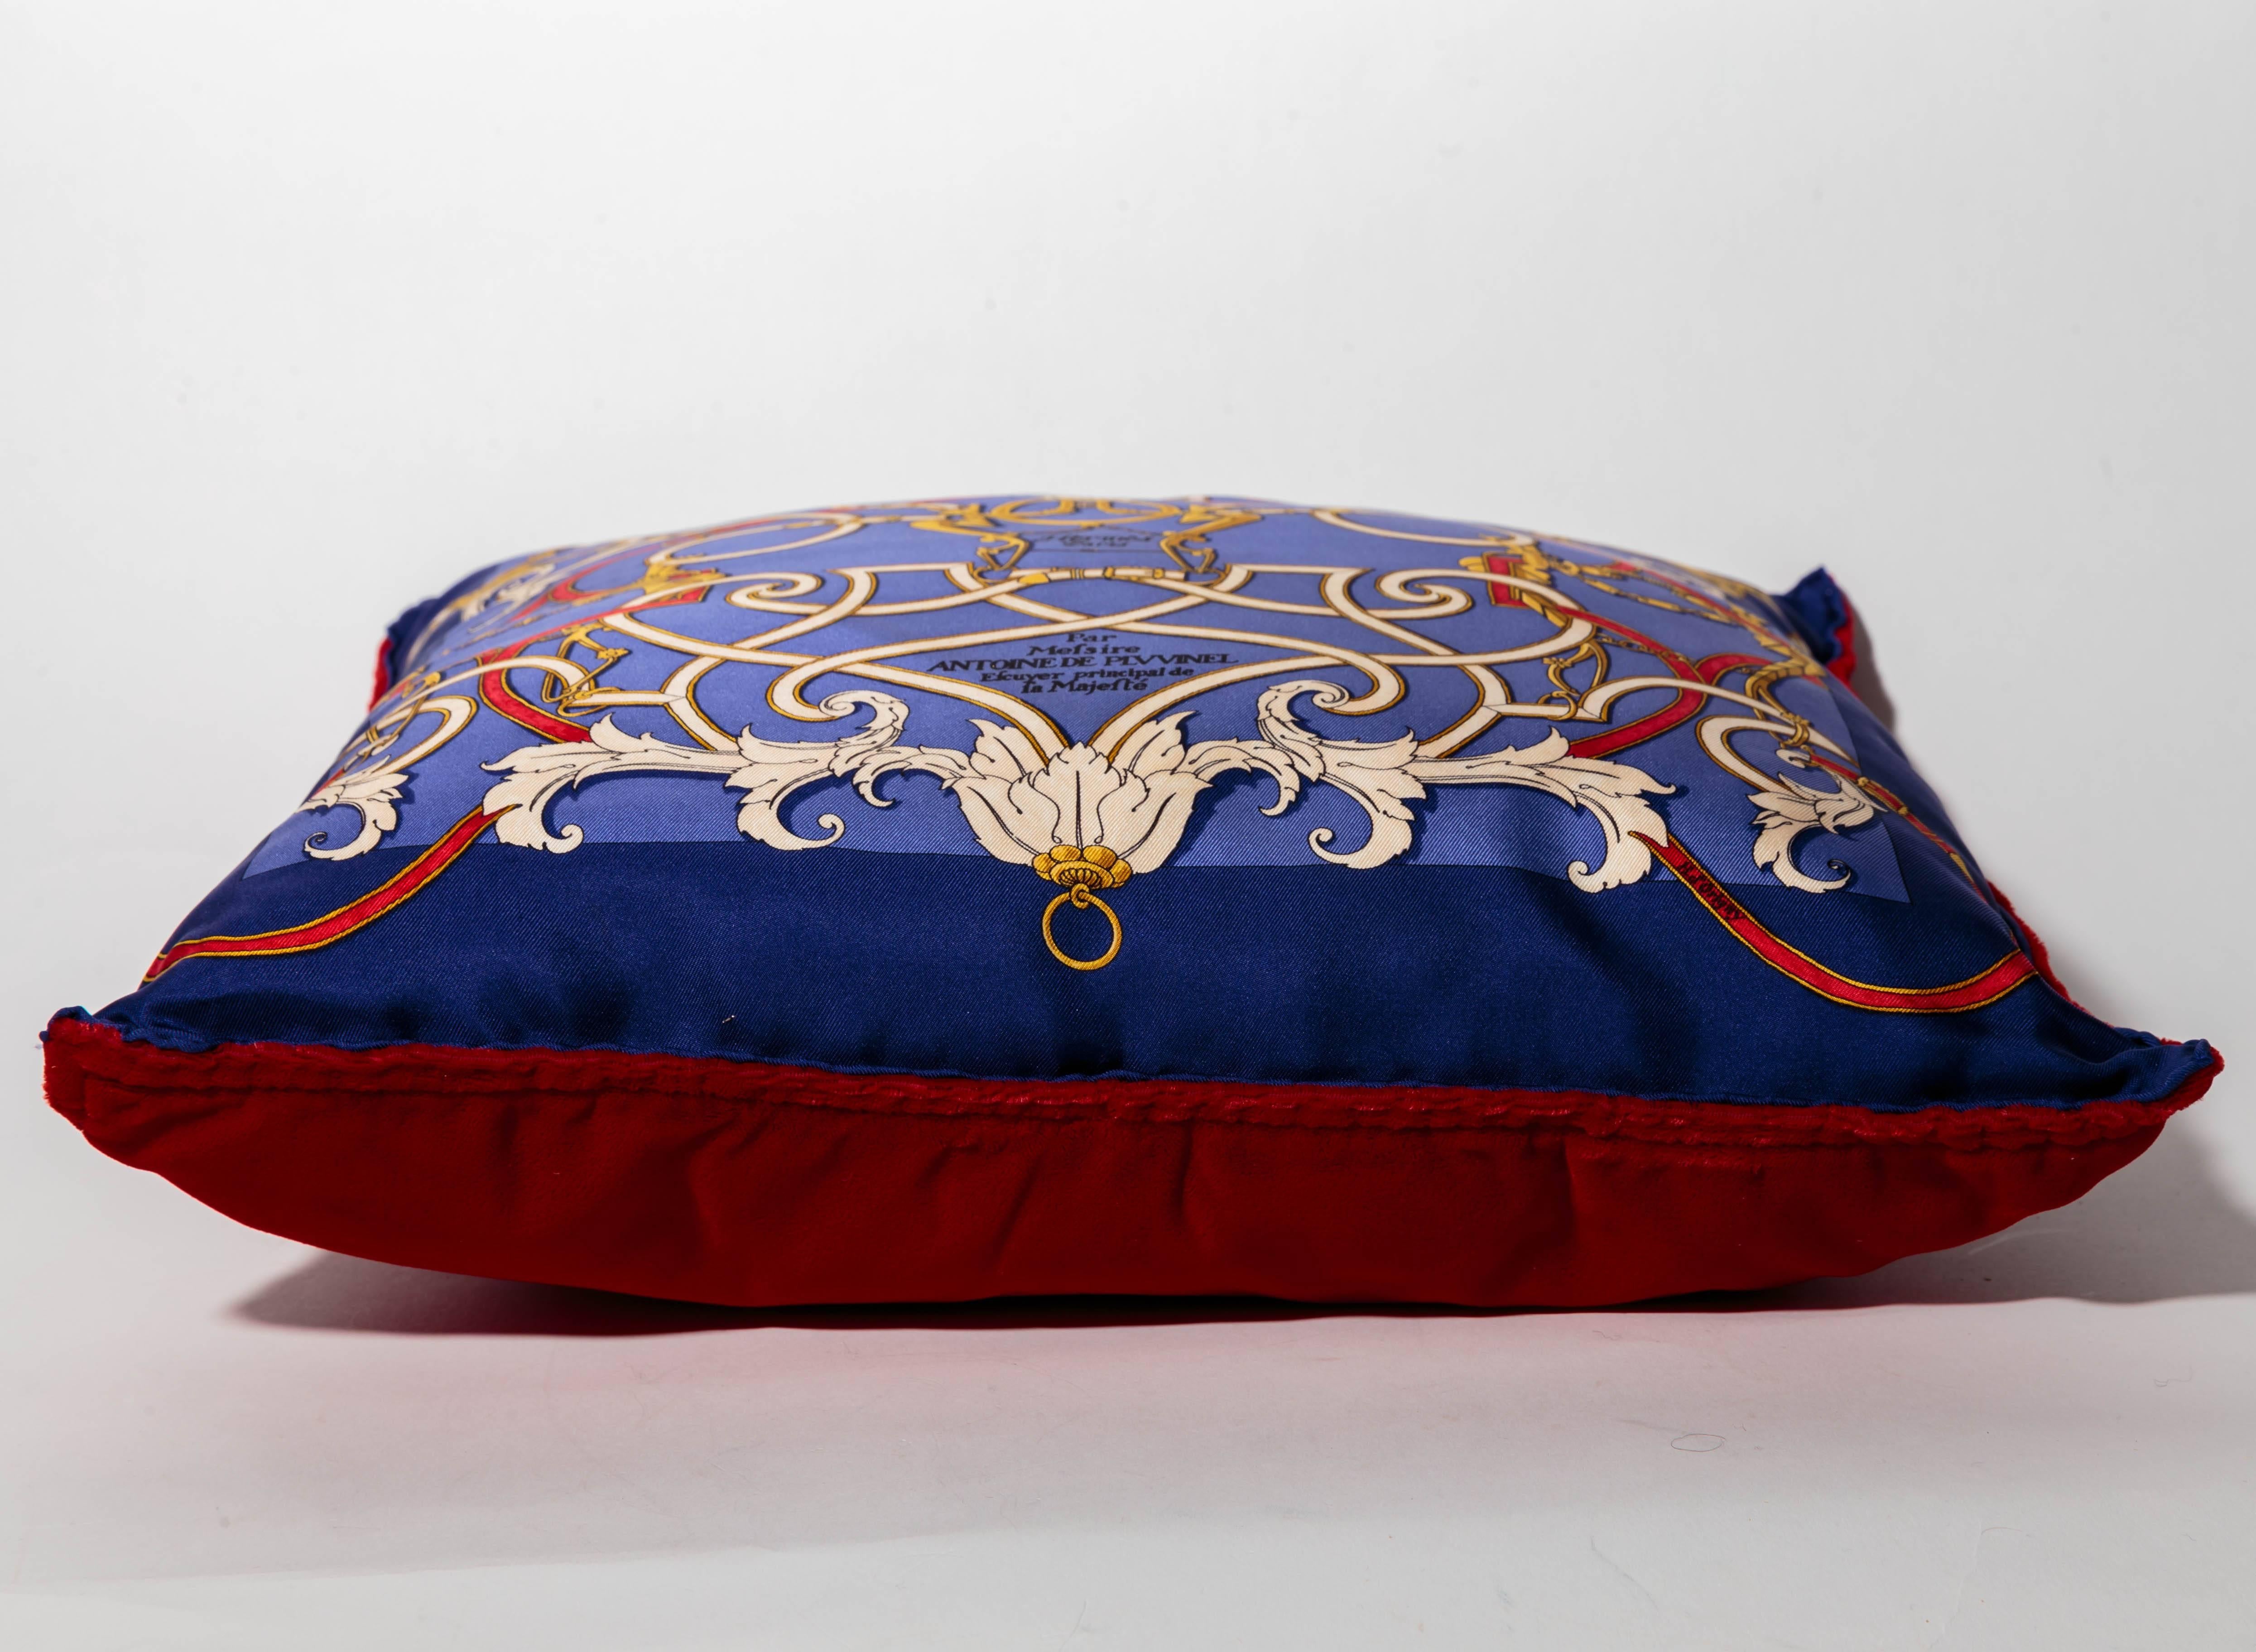 Hermes Silk and Velvet Backed Pillow In Excellent Condition For Sale In Westhampton Beach, NY